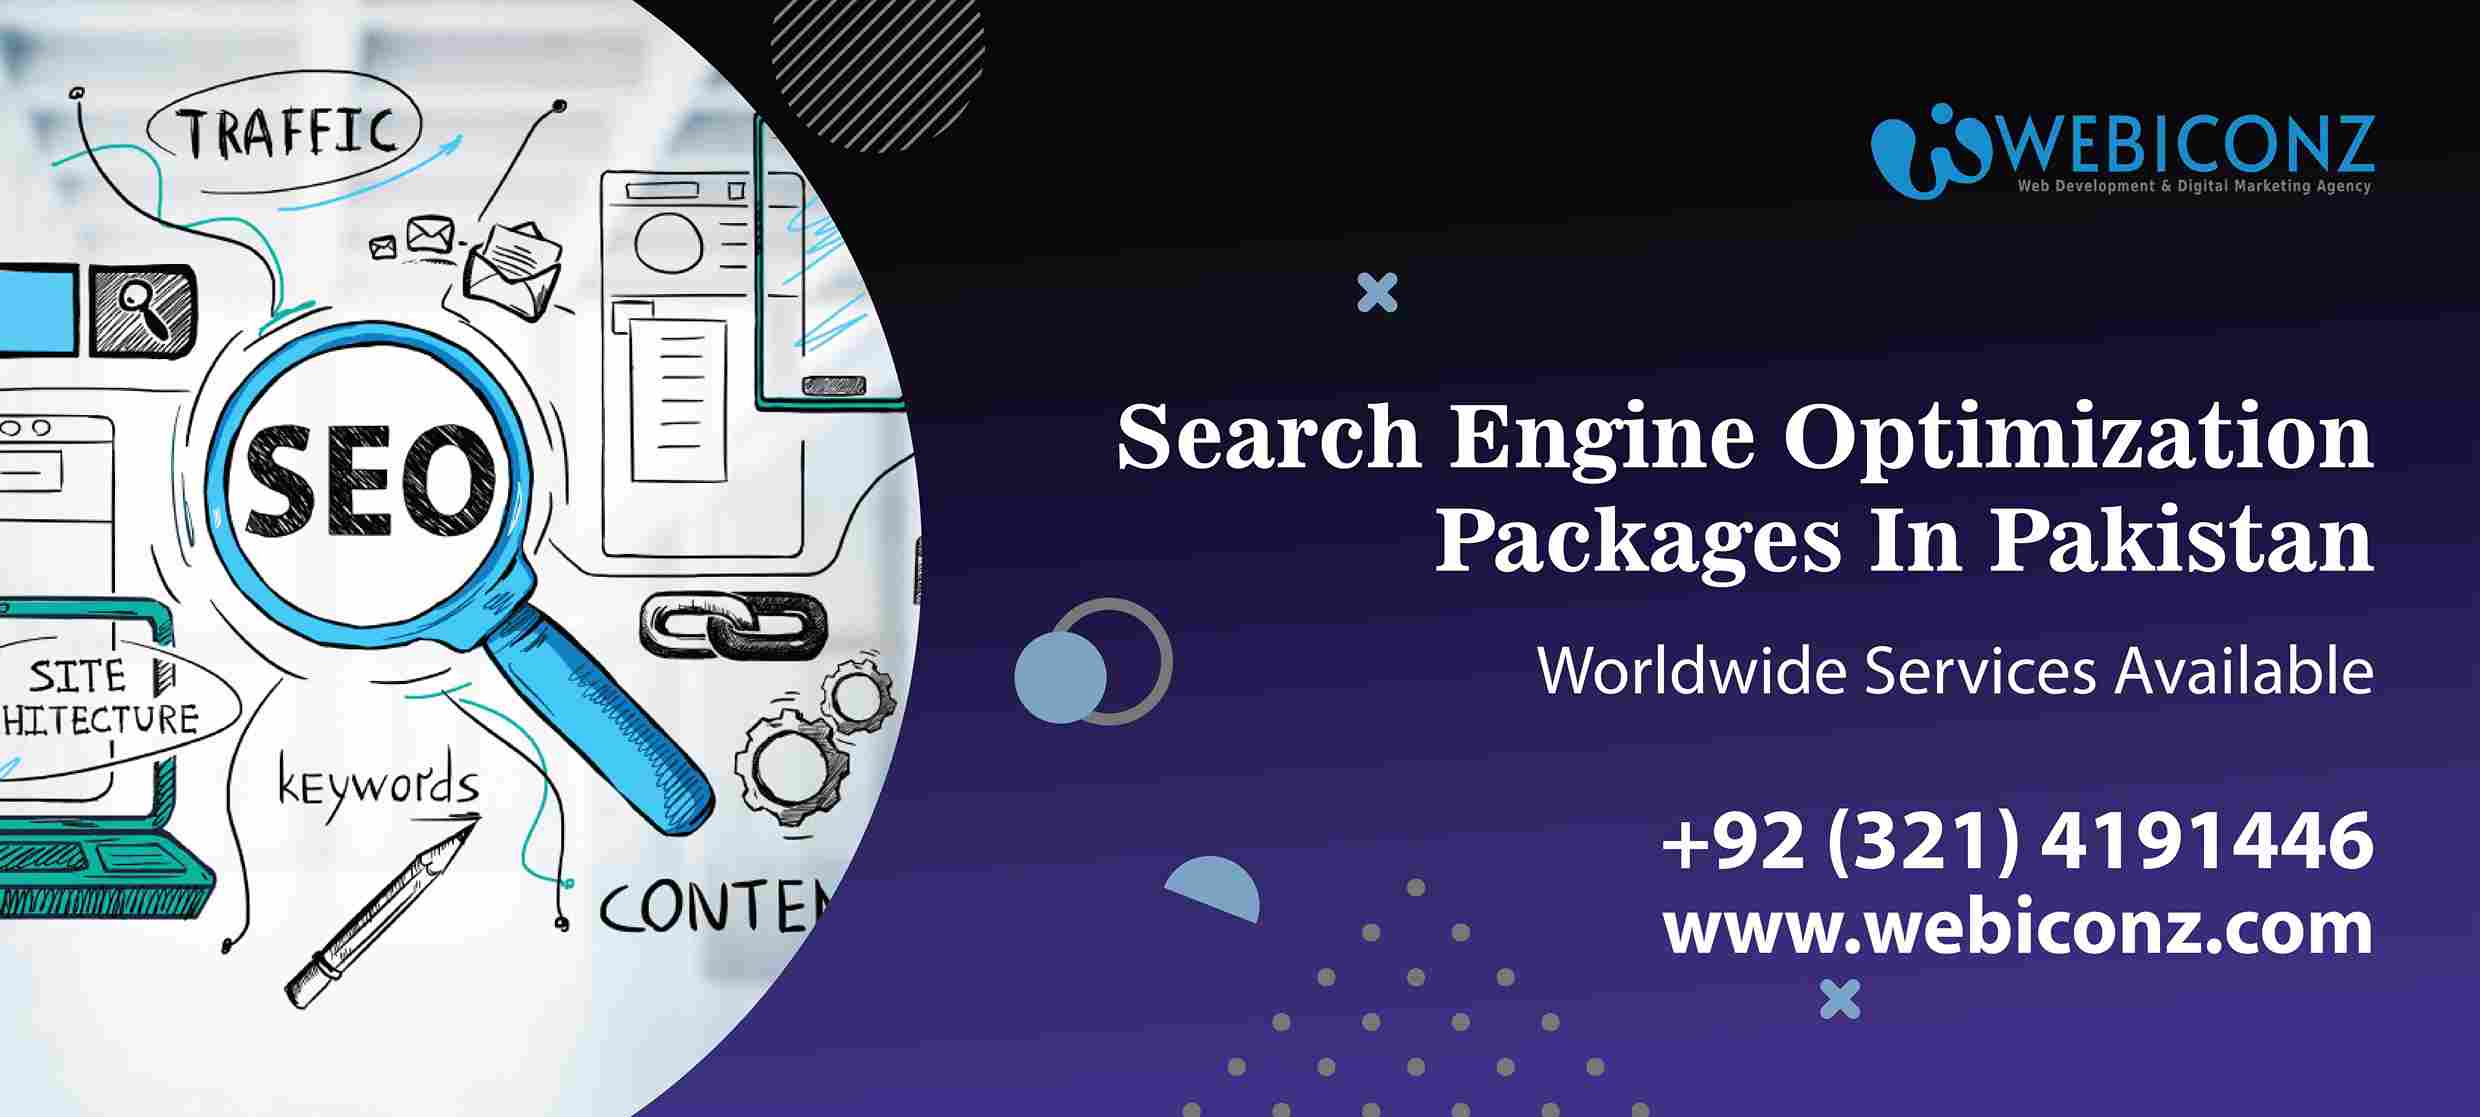 SEO Agency Near Me | Search Engine Optimisation Packages | eCommerce SEO Consultant,